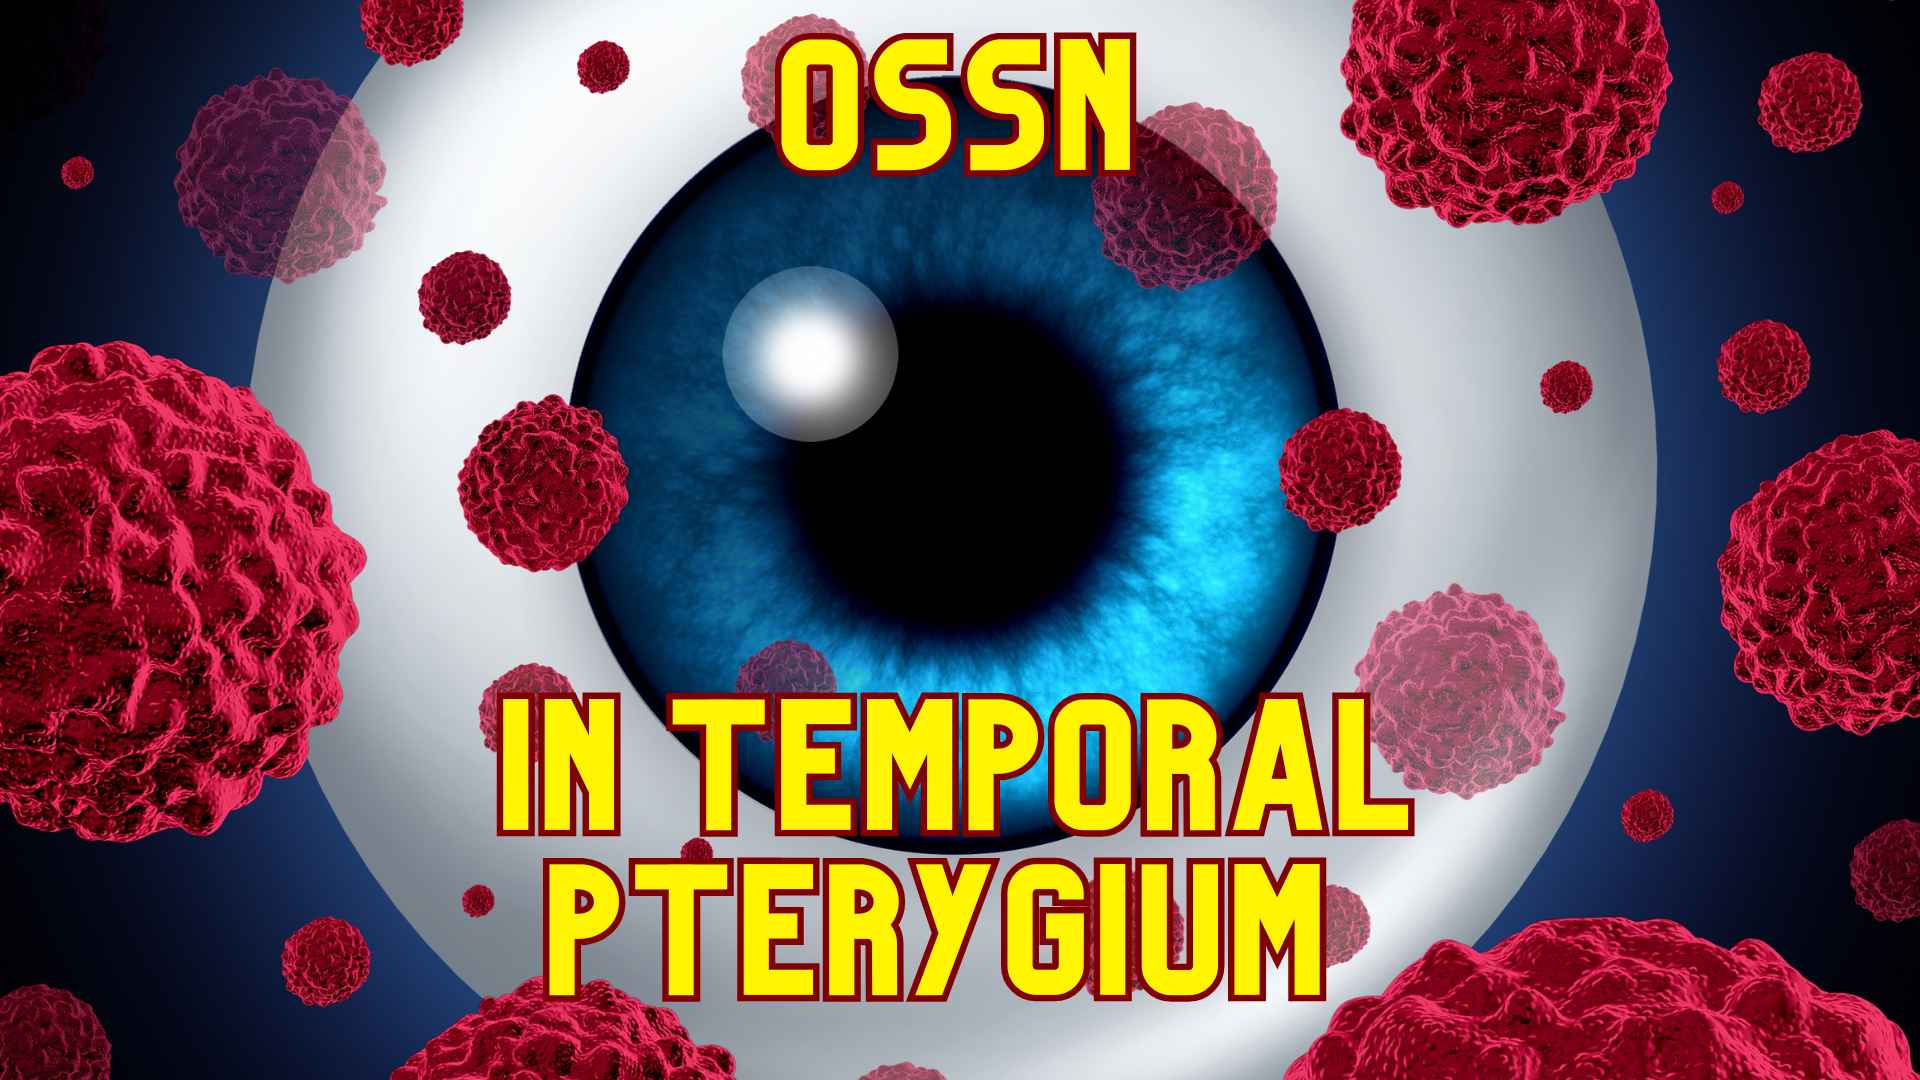 OSSN in temporal pterygium